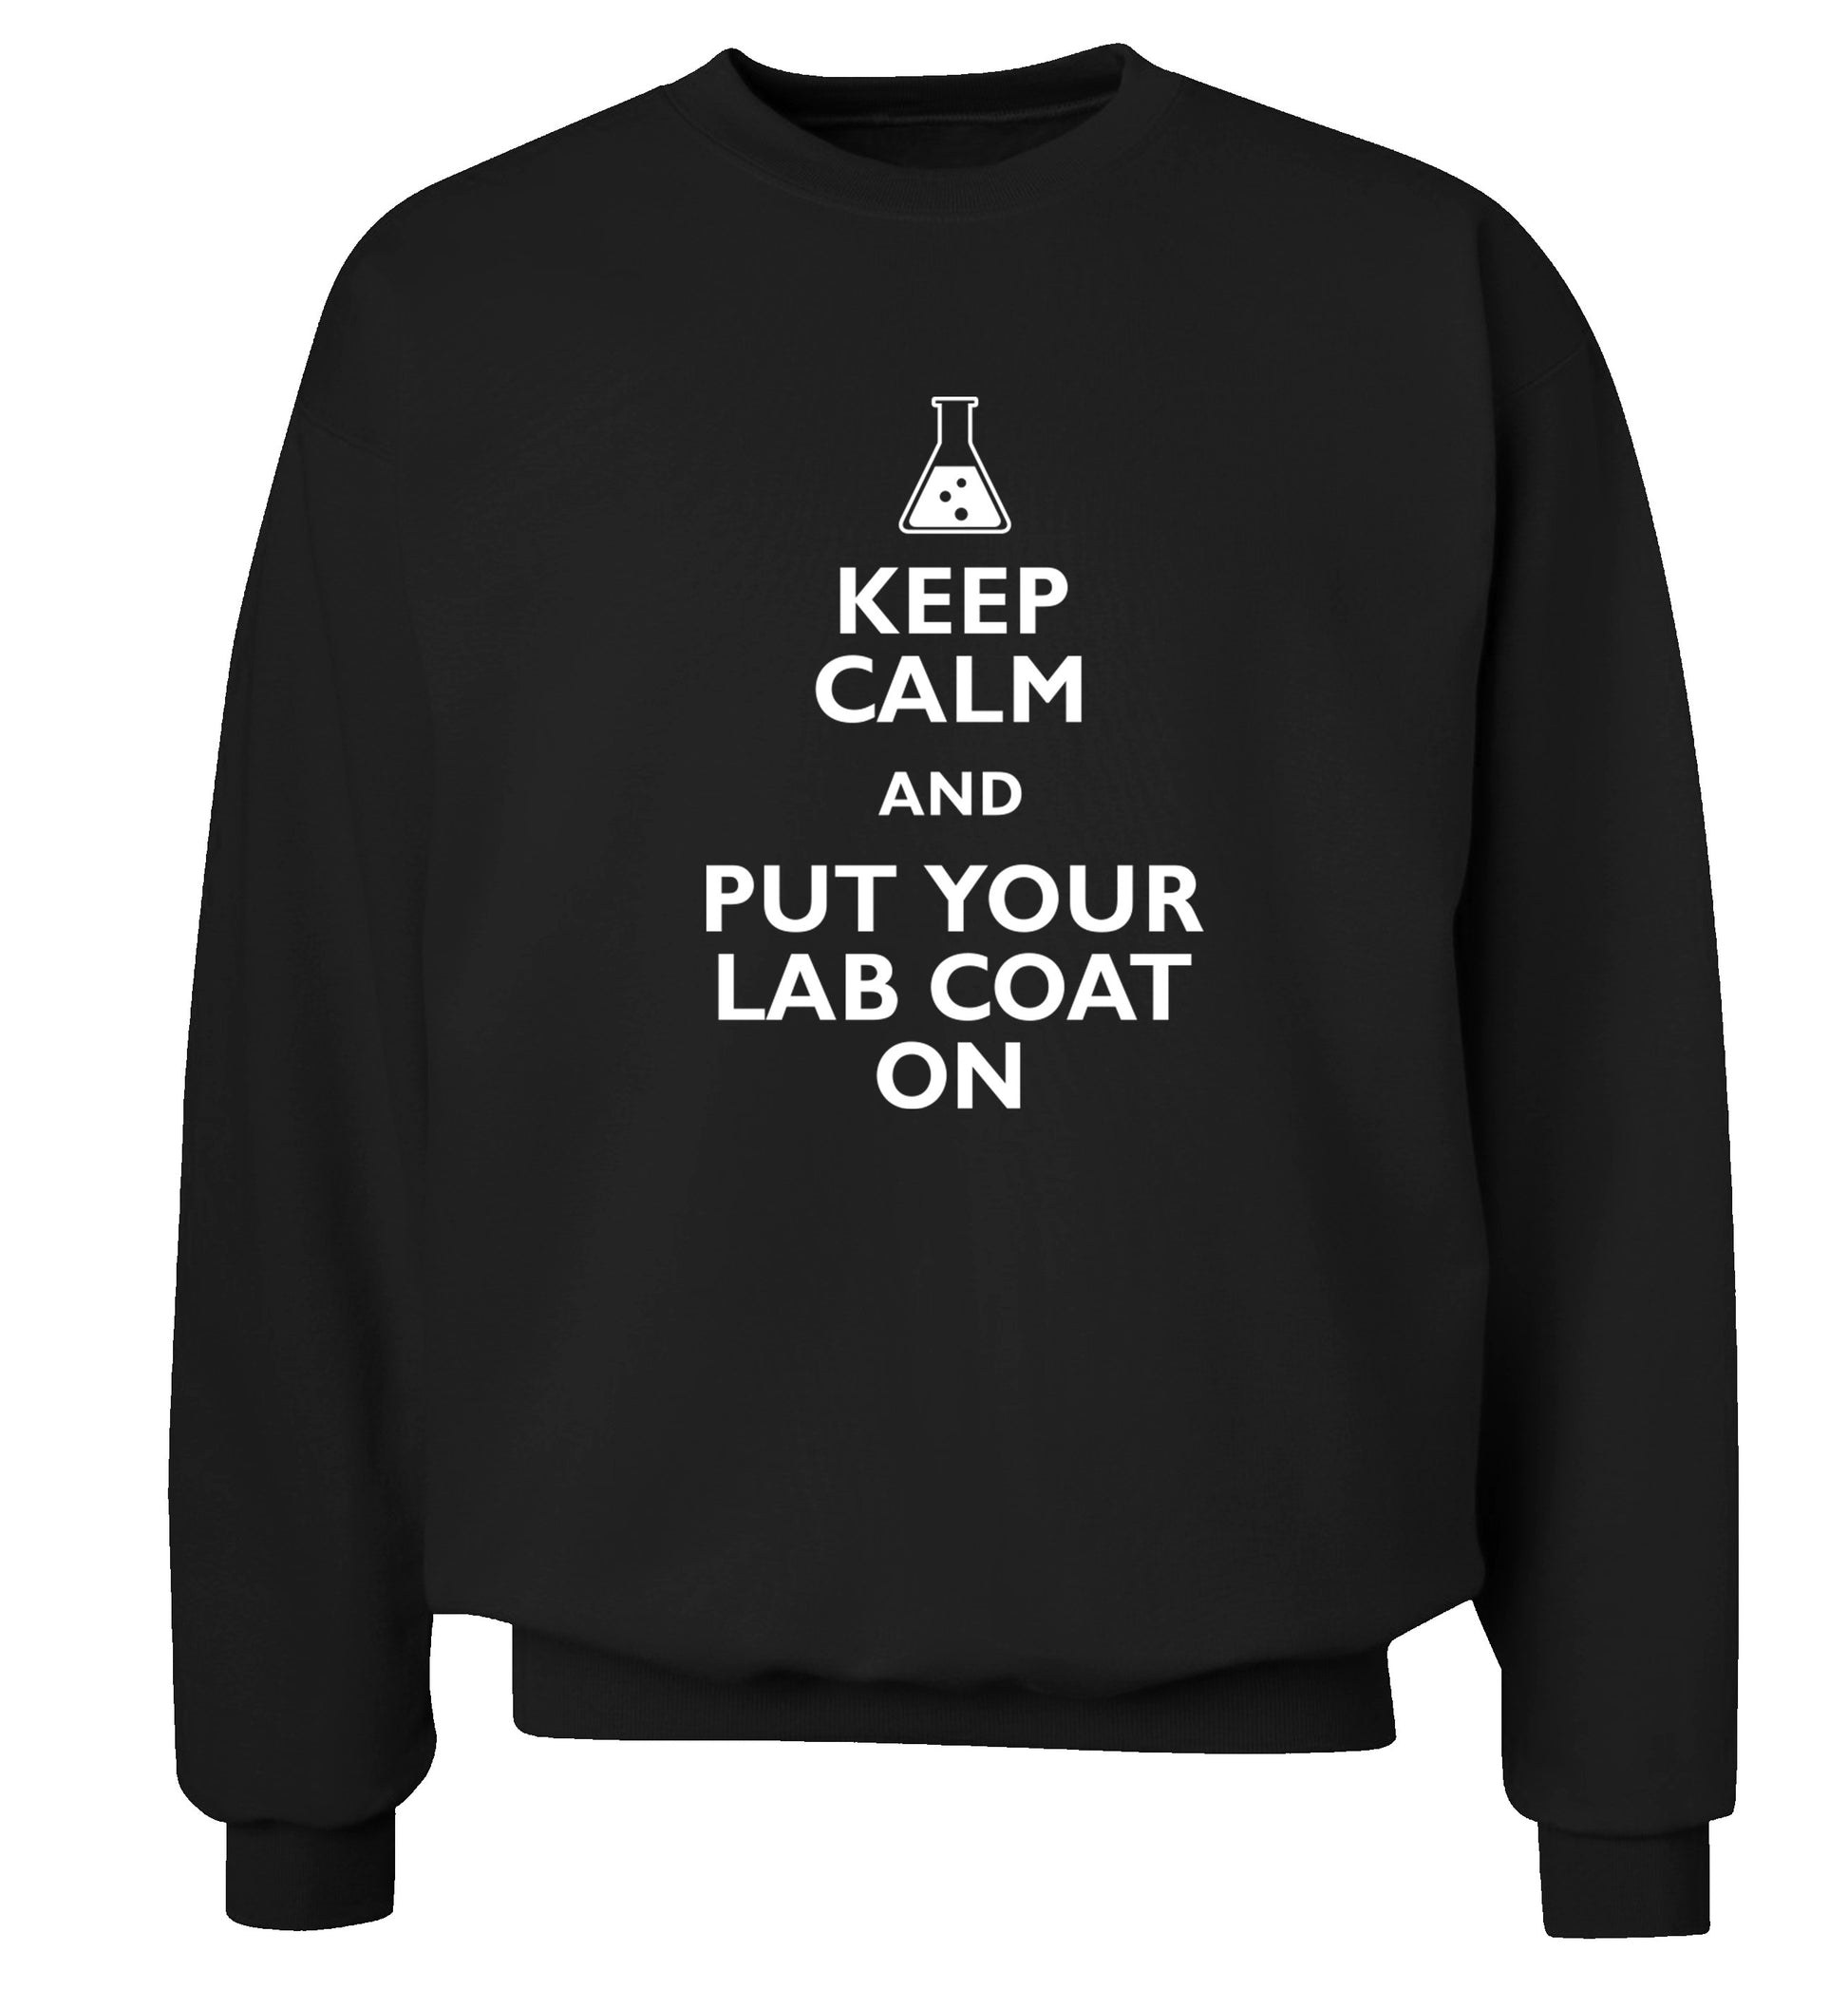 Keep calm and put your lab coat on Adult's unisex black Sweater 2XL